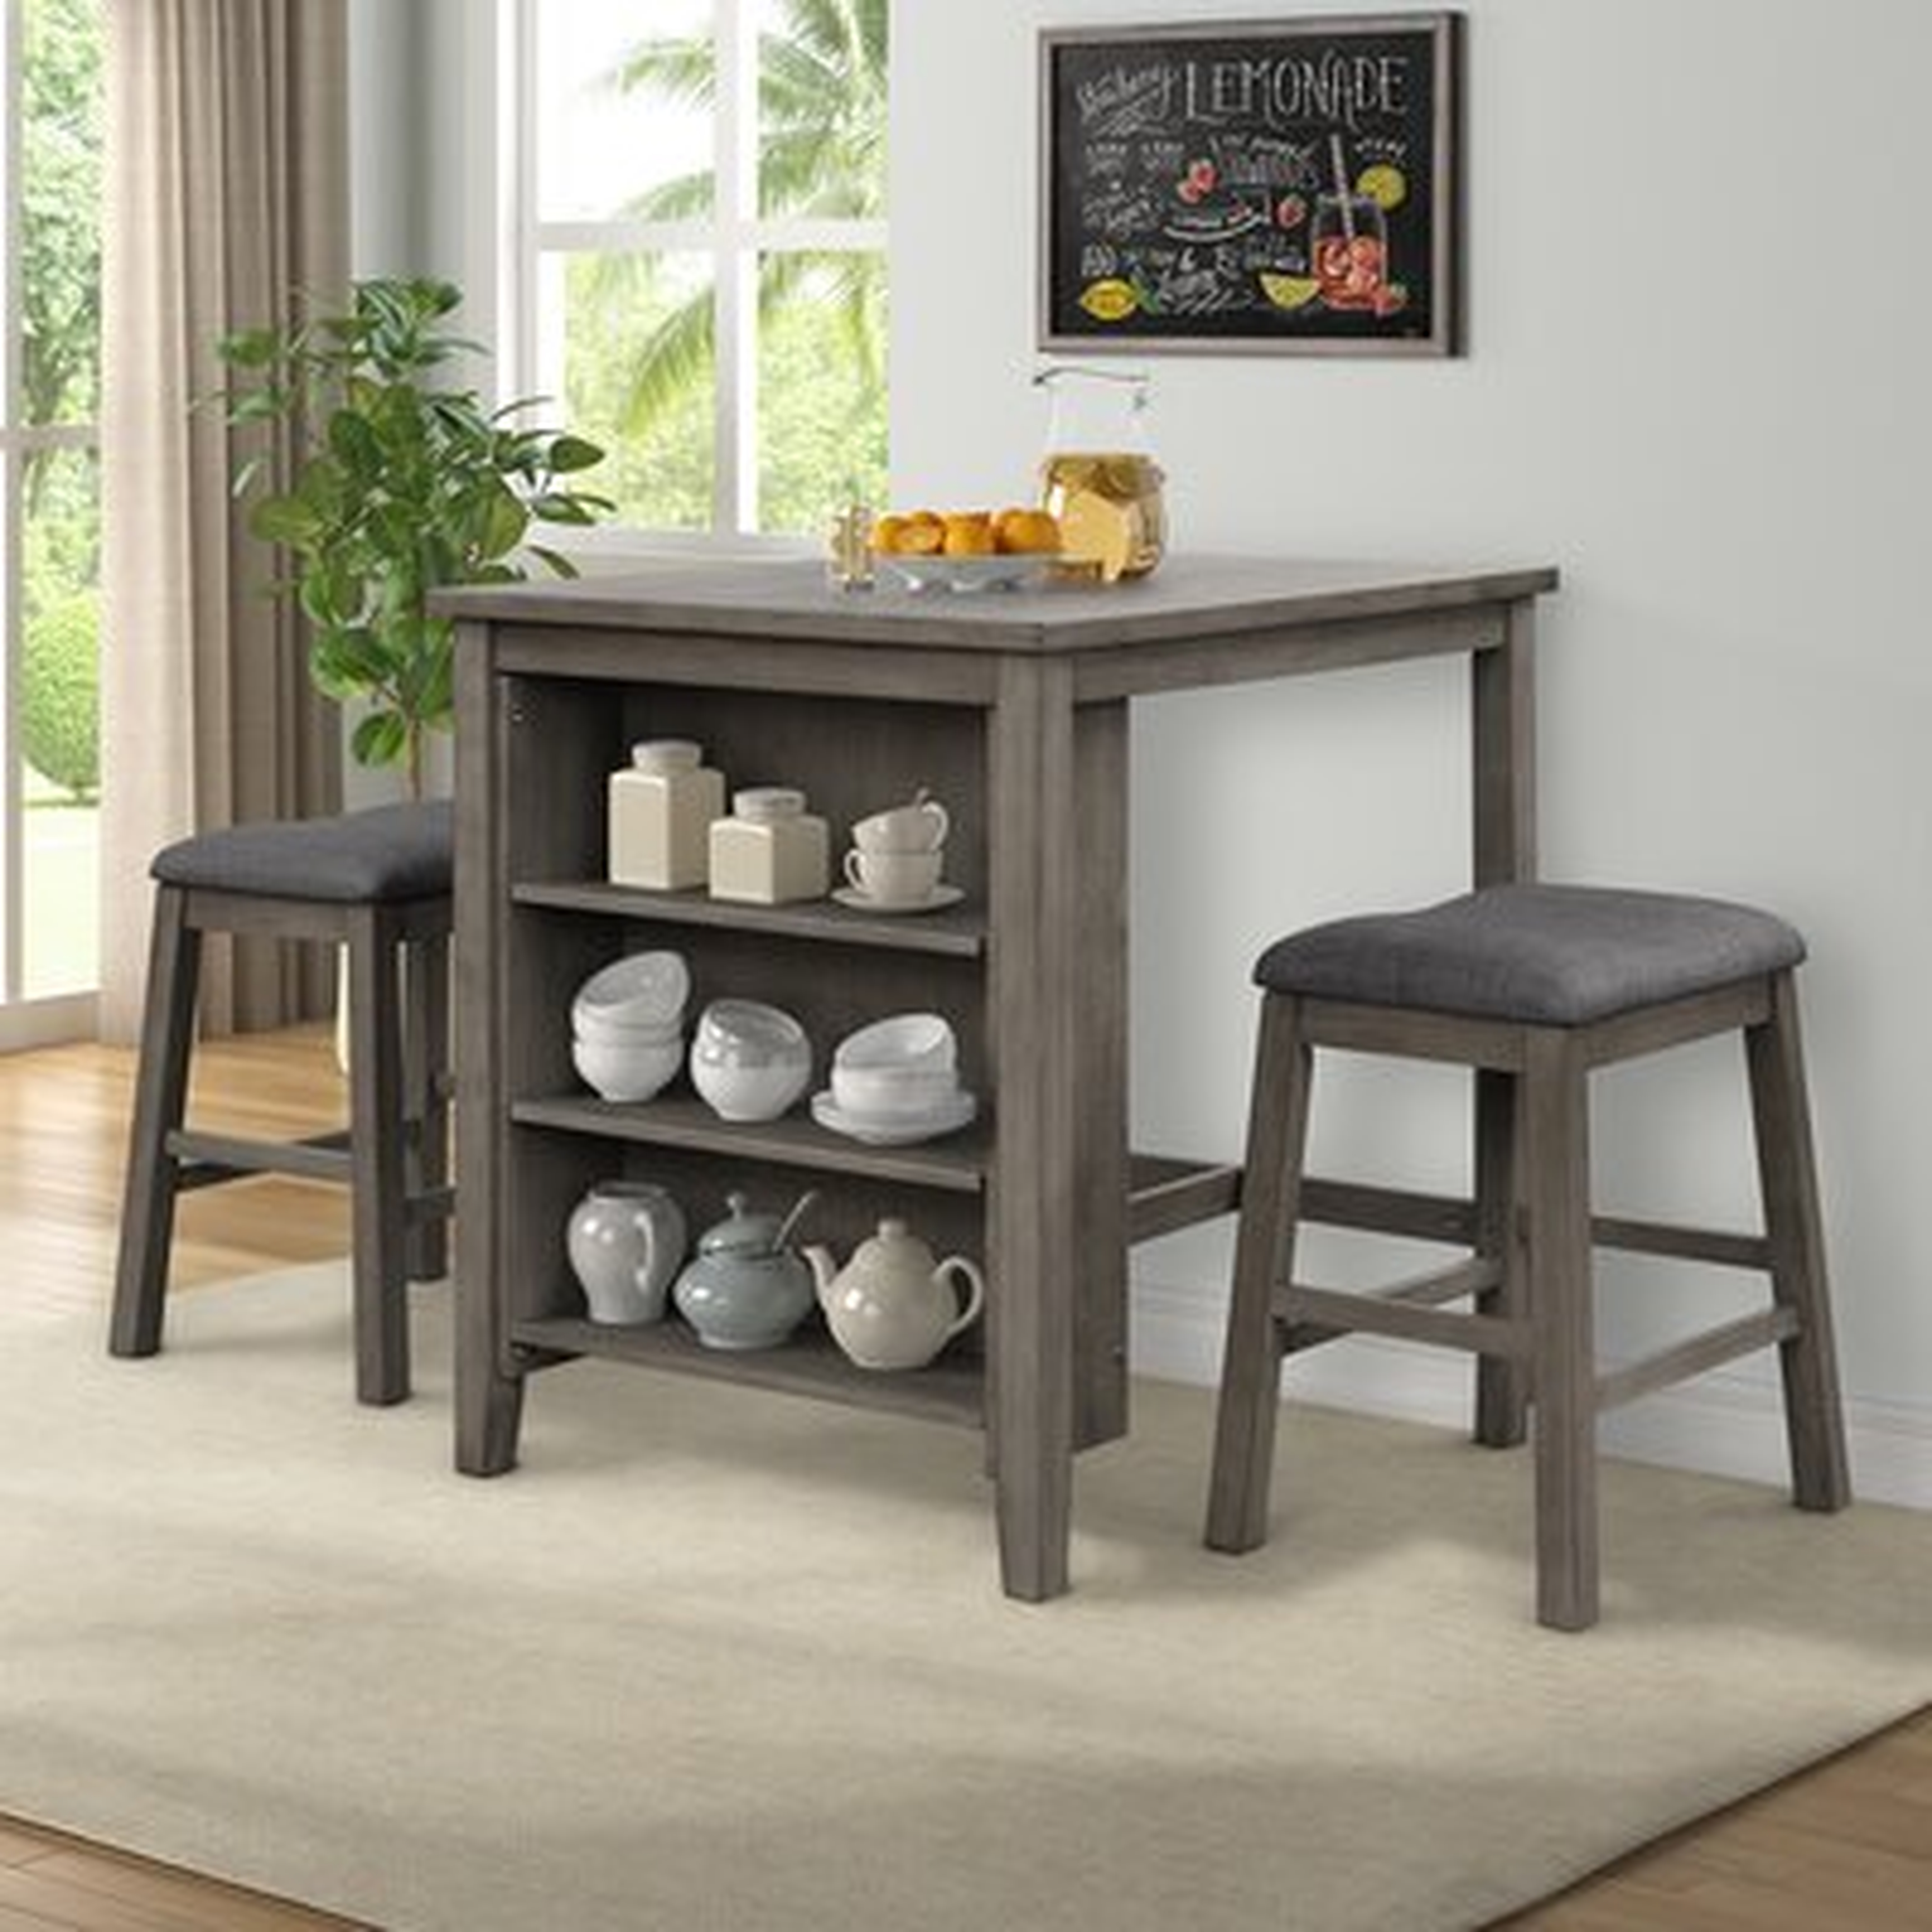 3 Piece Square Dining Table With Padded Stools Table Set With Storage Shelf Dark Gray - Wayfair